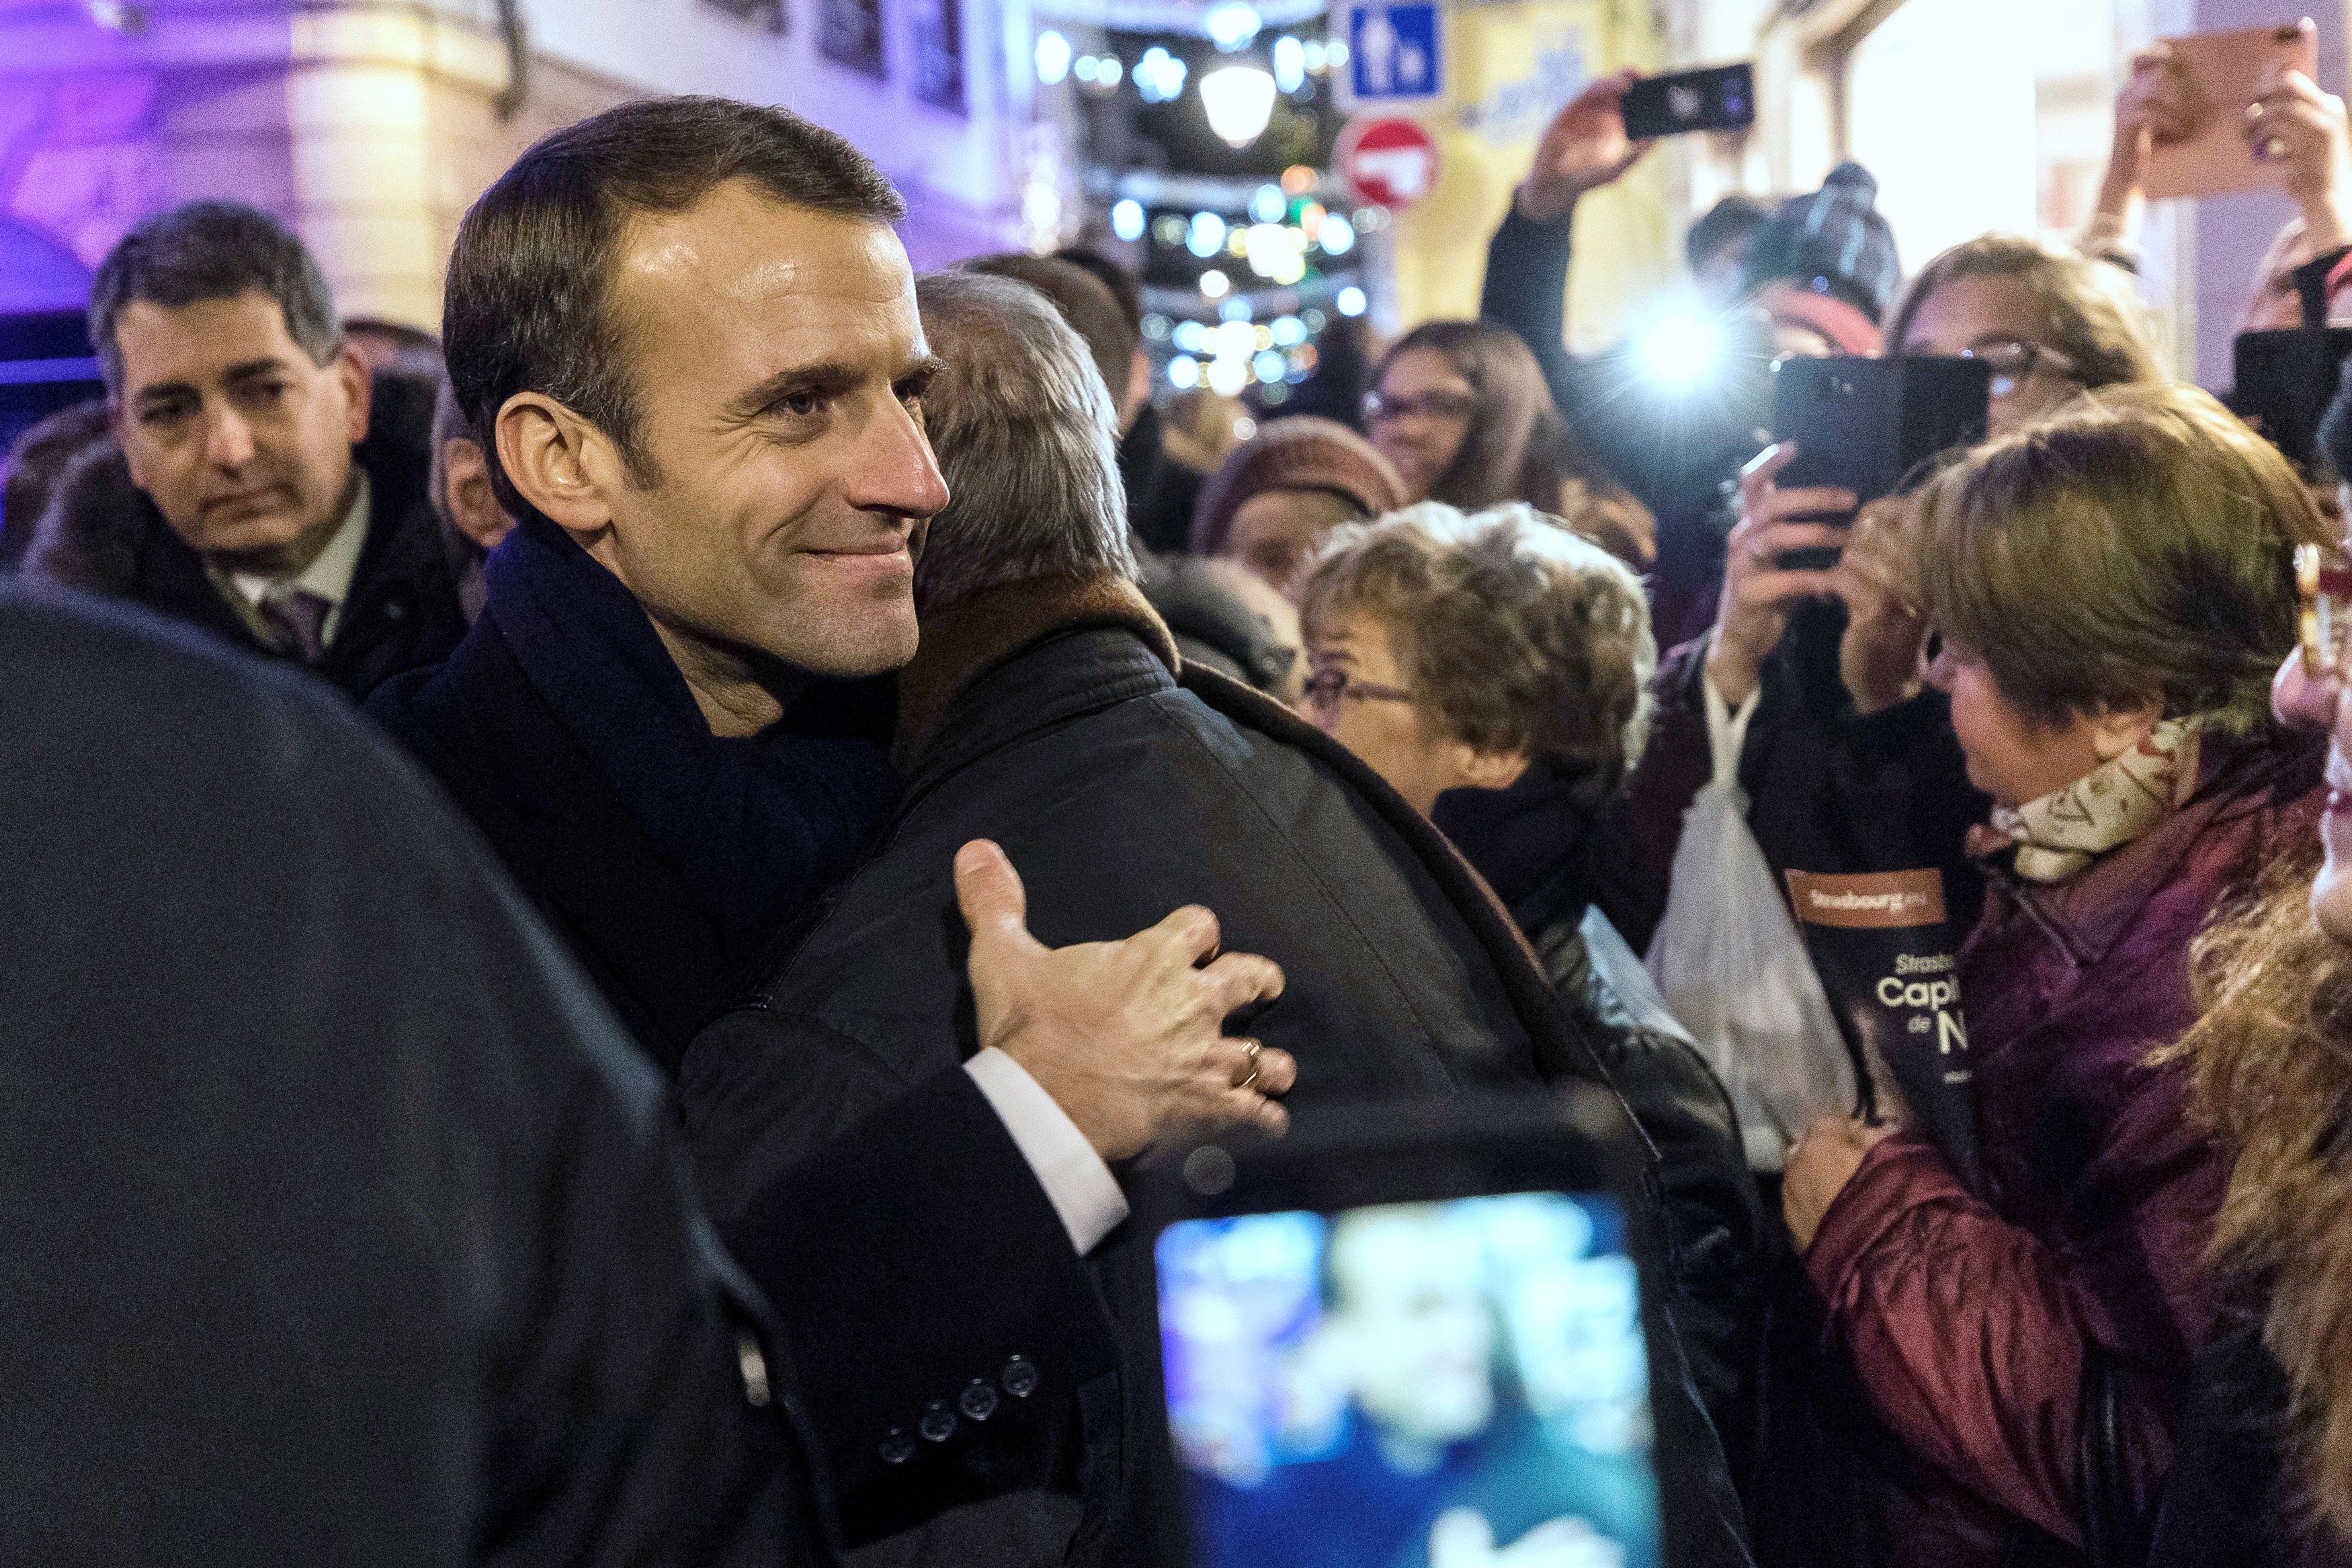 2018-12-14T202159Z_161702317_RC12D23741A0_RTRMADP_3_FRANCE-SECURITY-MACRON-CHRISTMAS